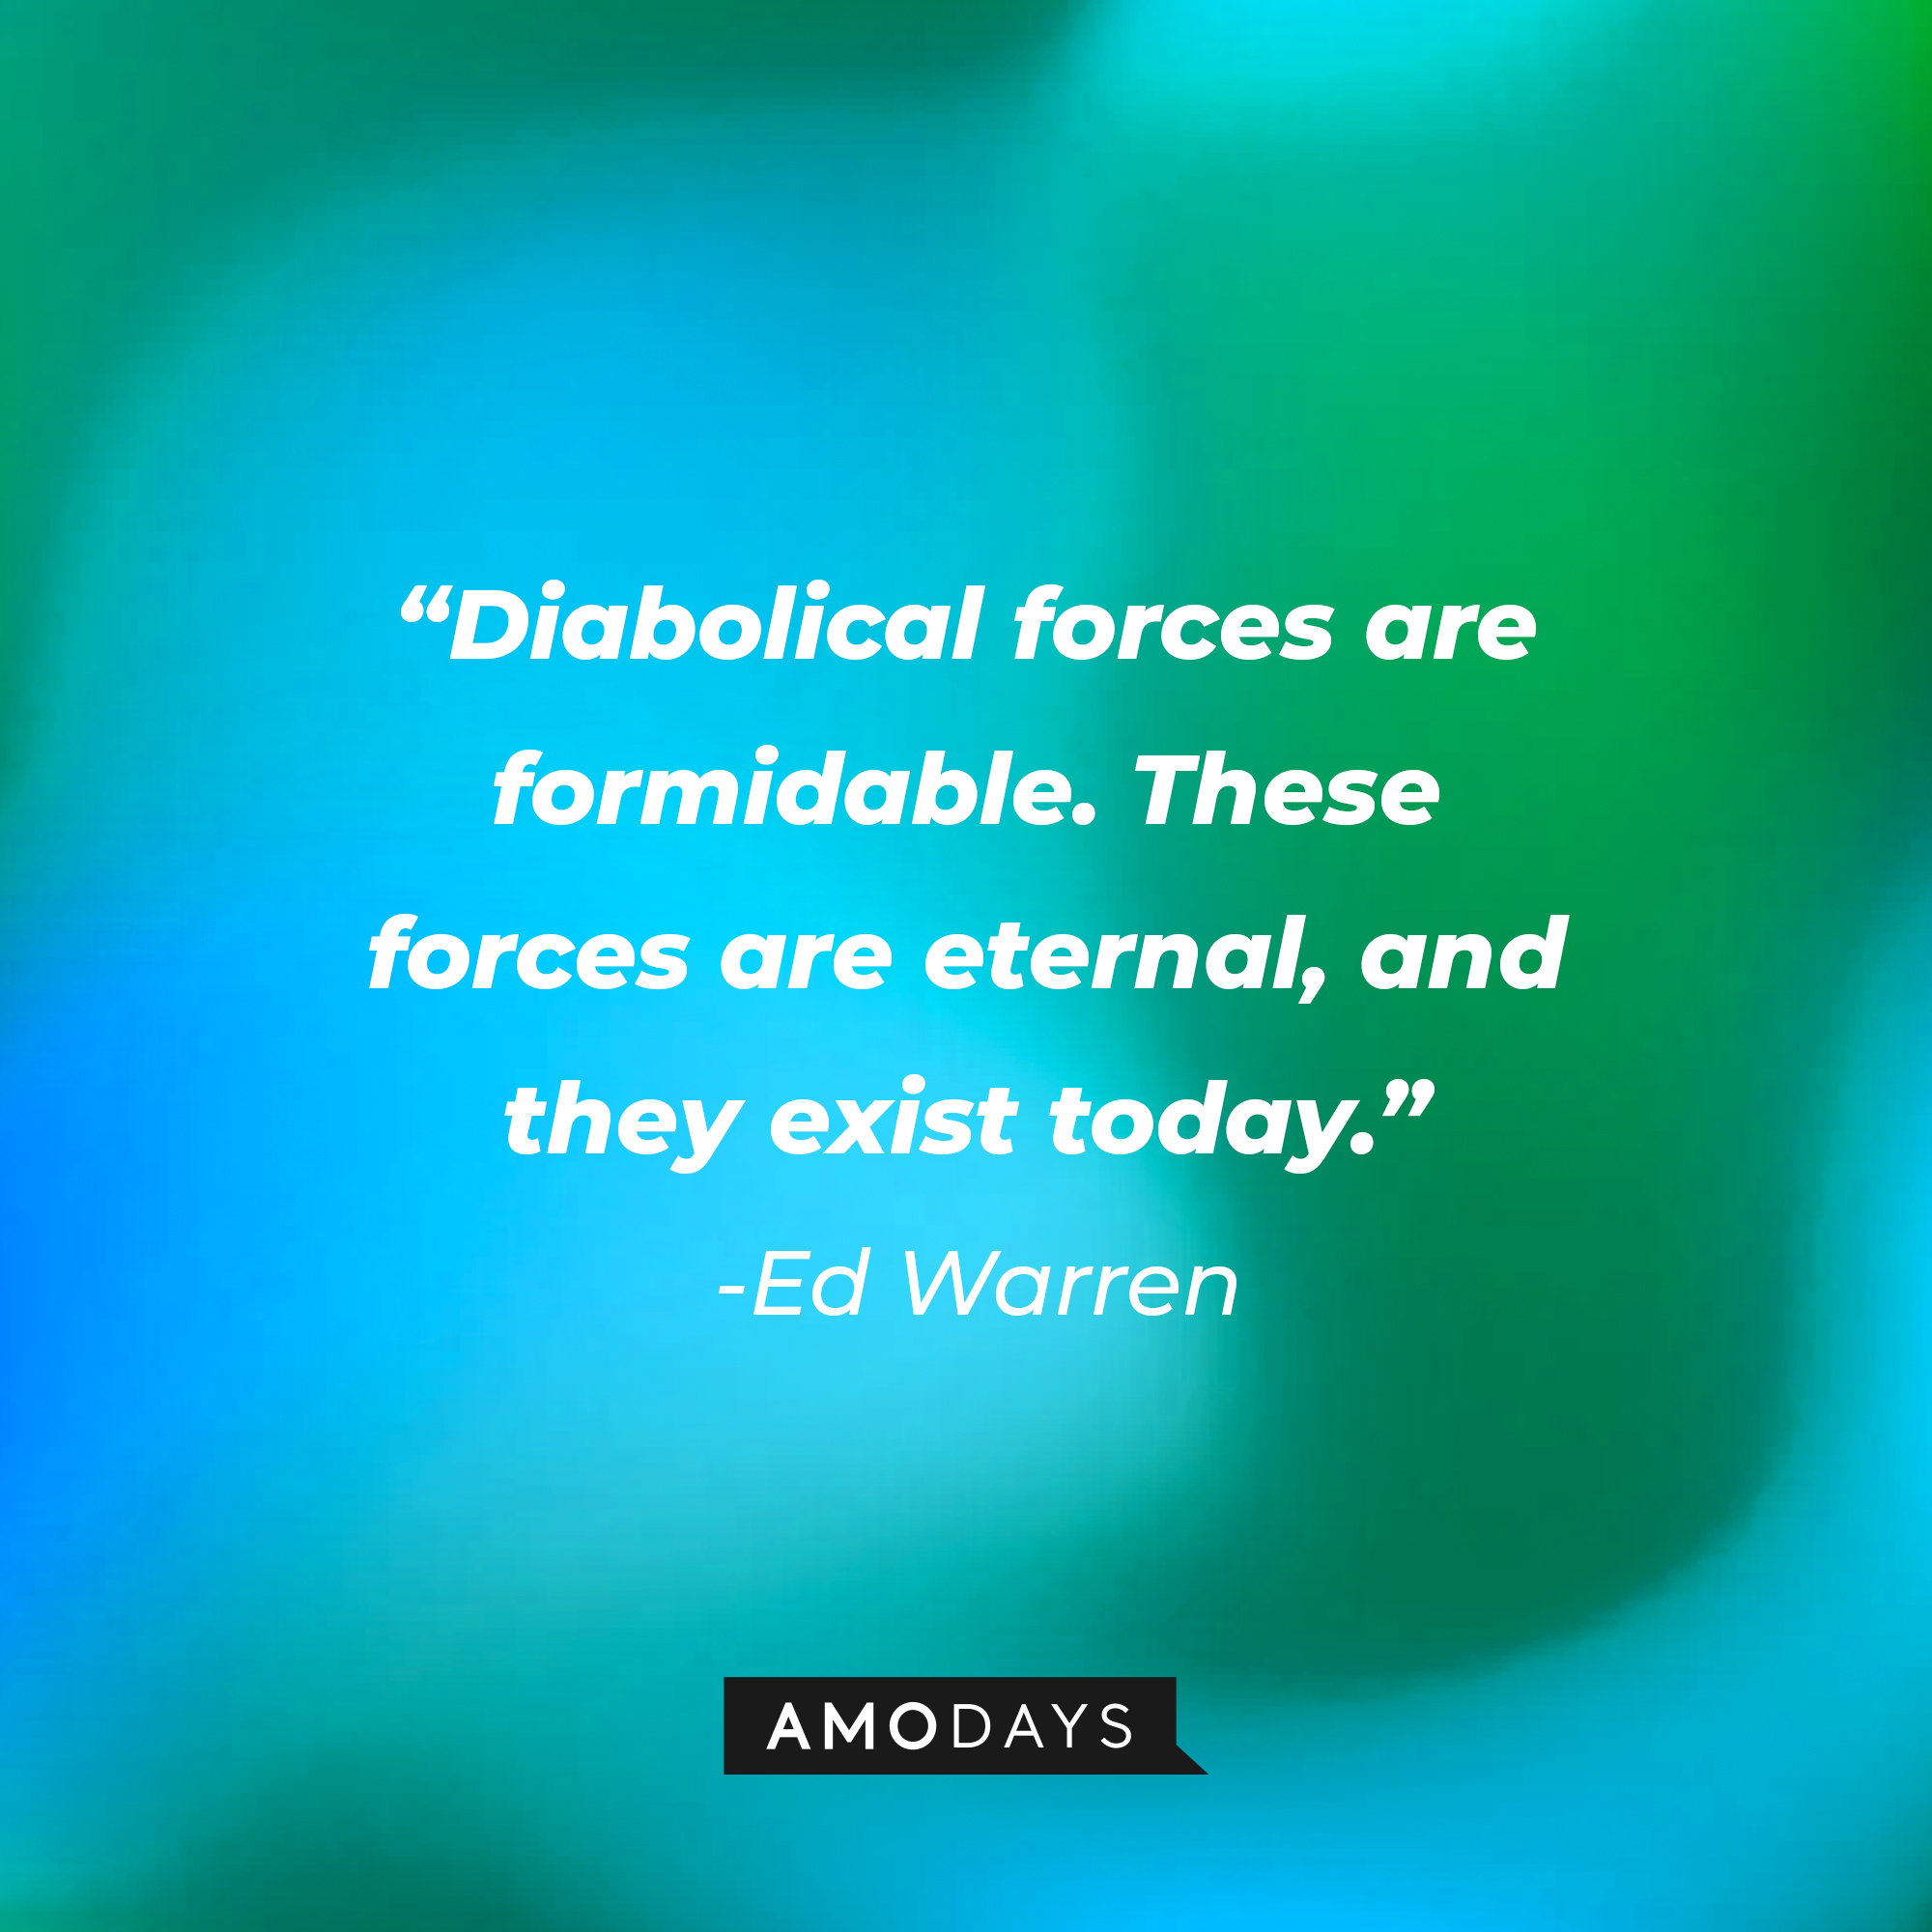 Ed Warren’s quote: “Diabolical forces are formidable. These forces are eternal, and they exist today.” | Source: AmoDays